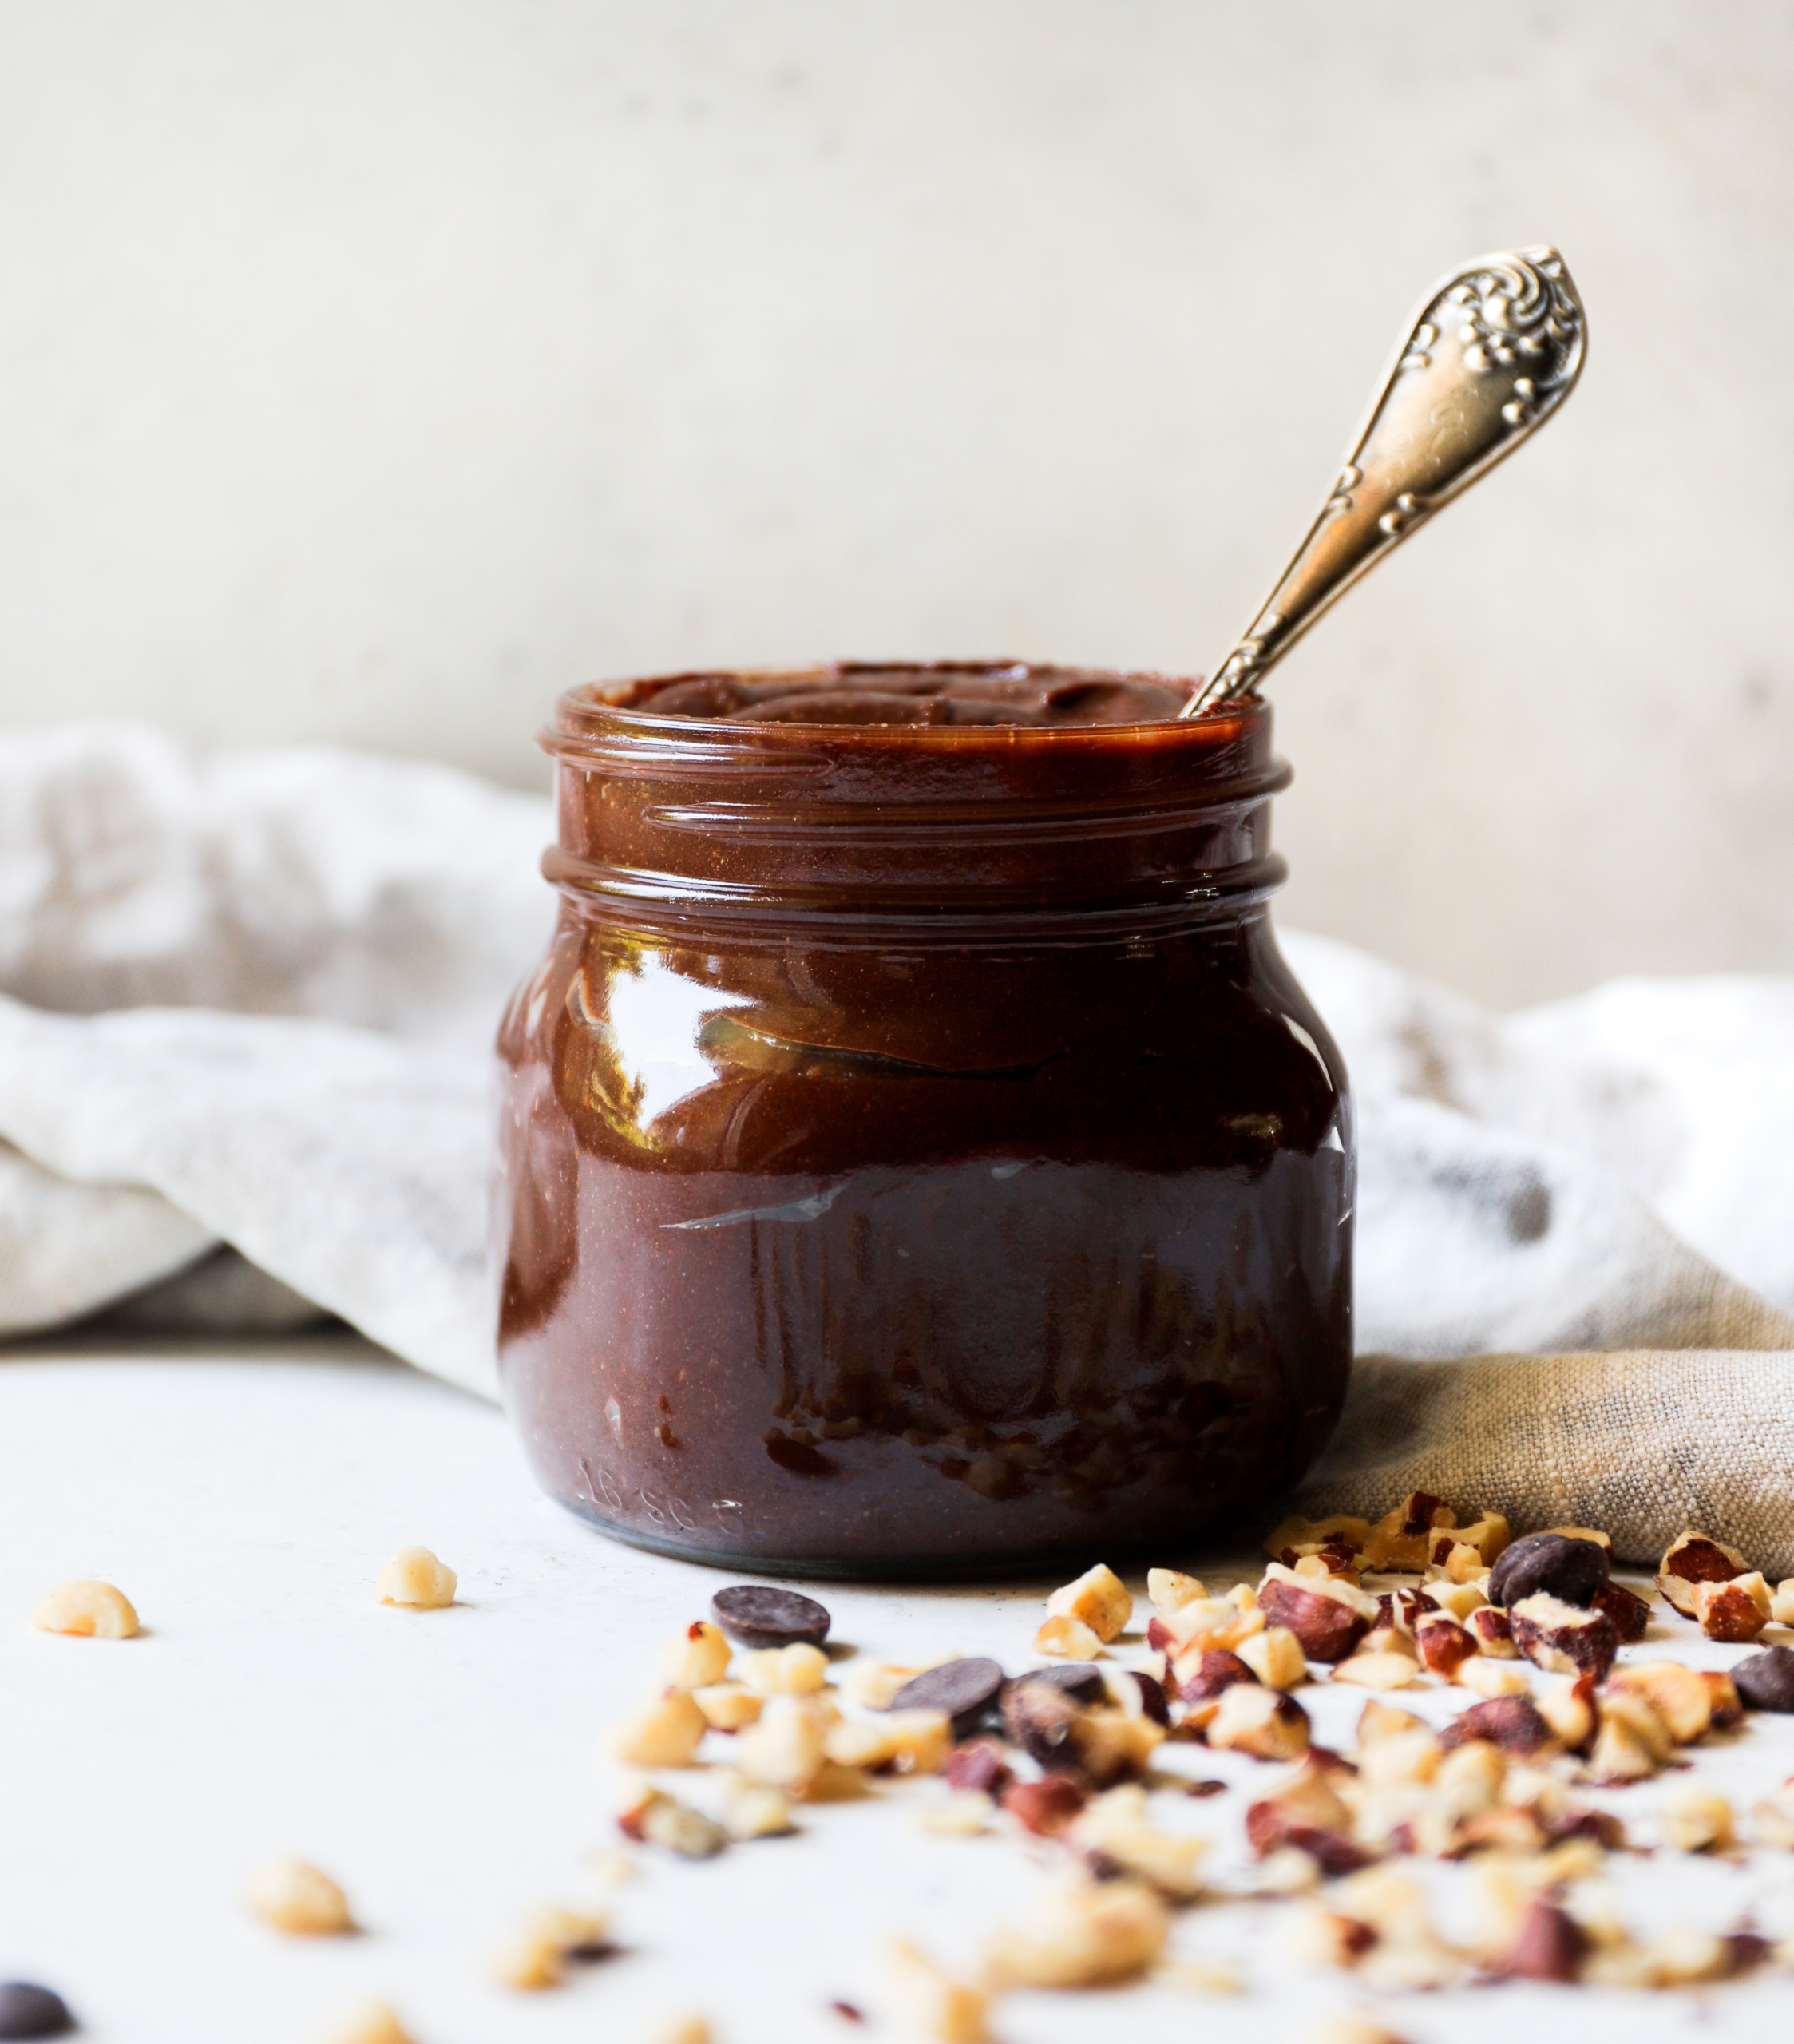 Nutella in a jar with hazelnuts on the white table.